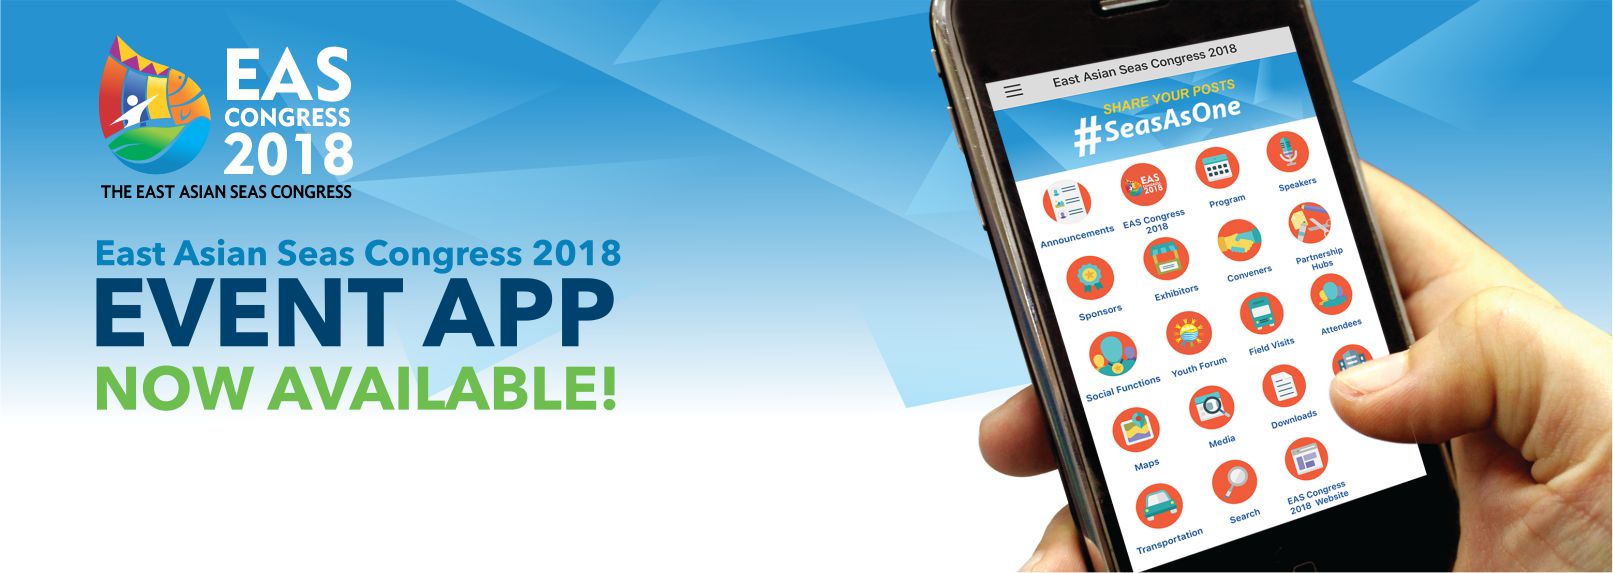 East Asian Seas Congress Mobile App Now Available!